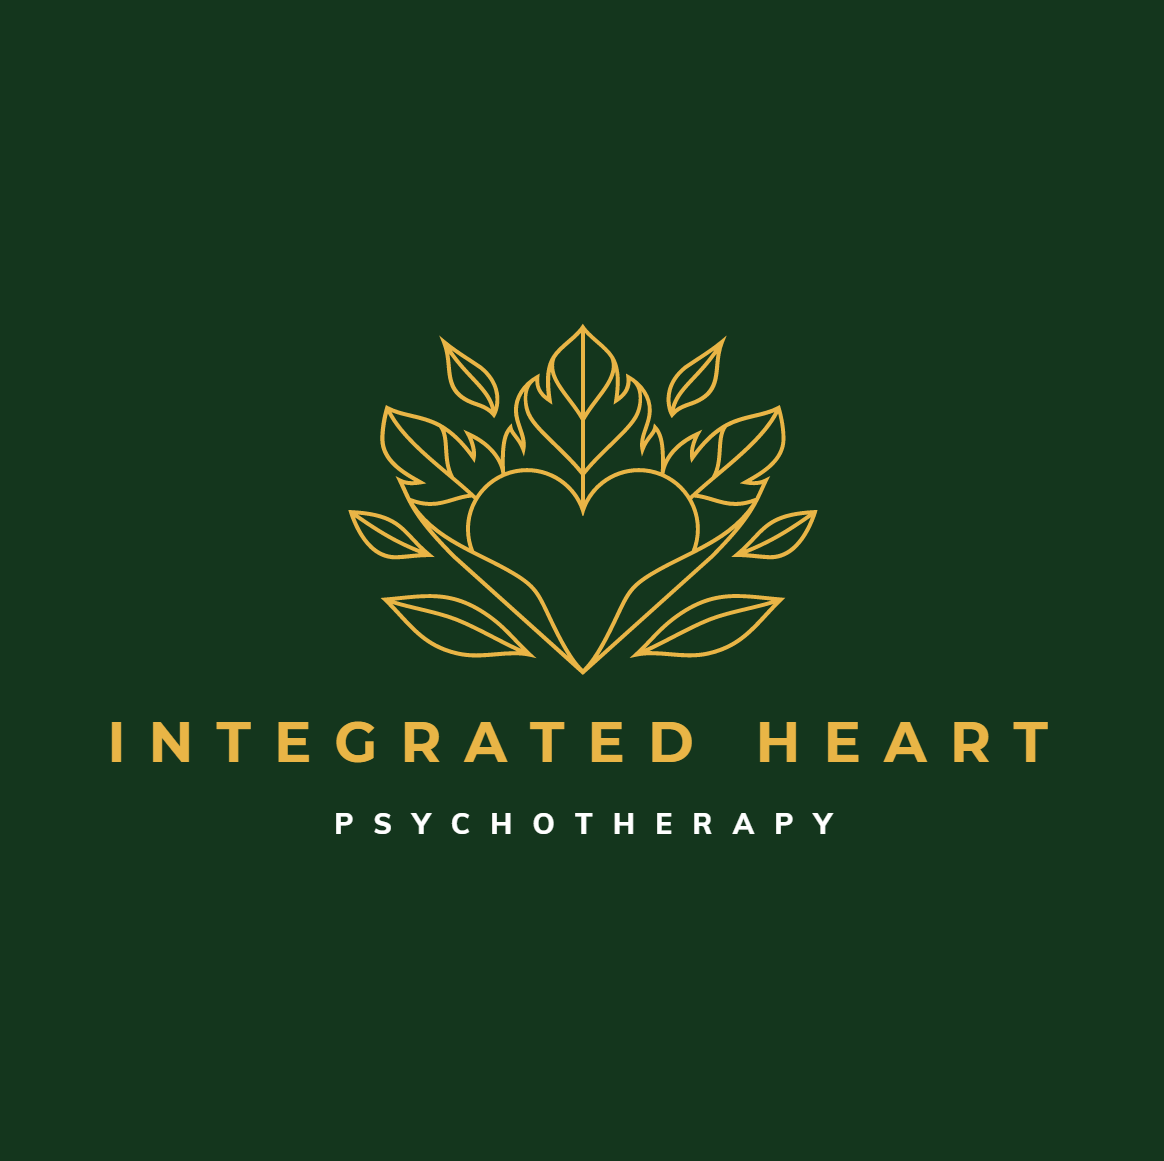 Integrated Heart Psychotherapy